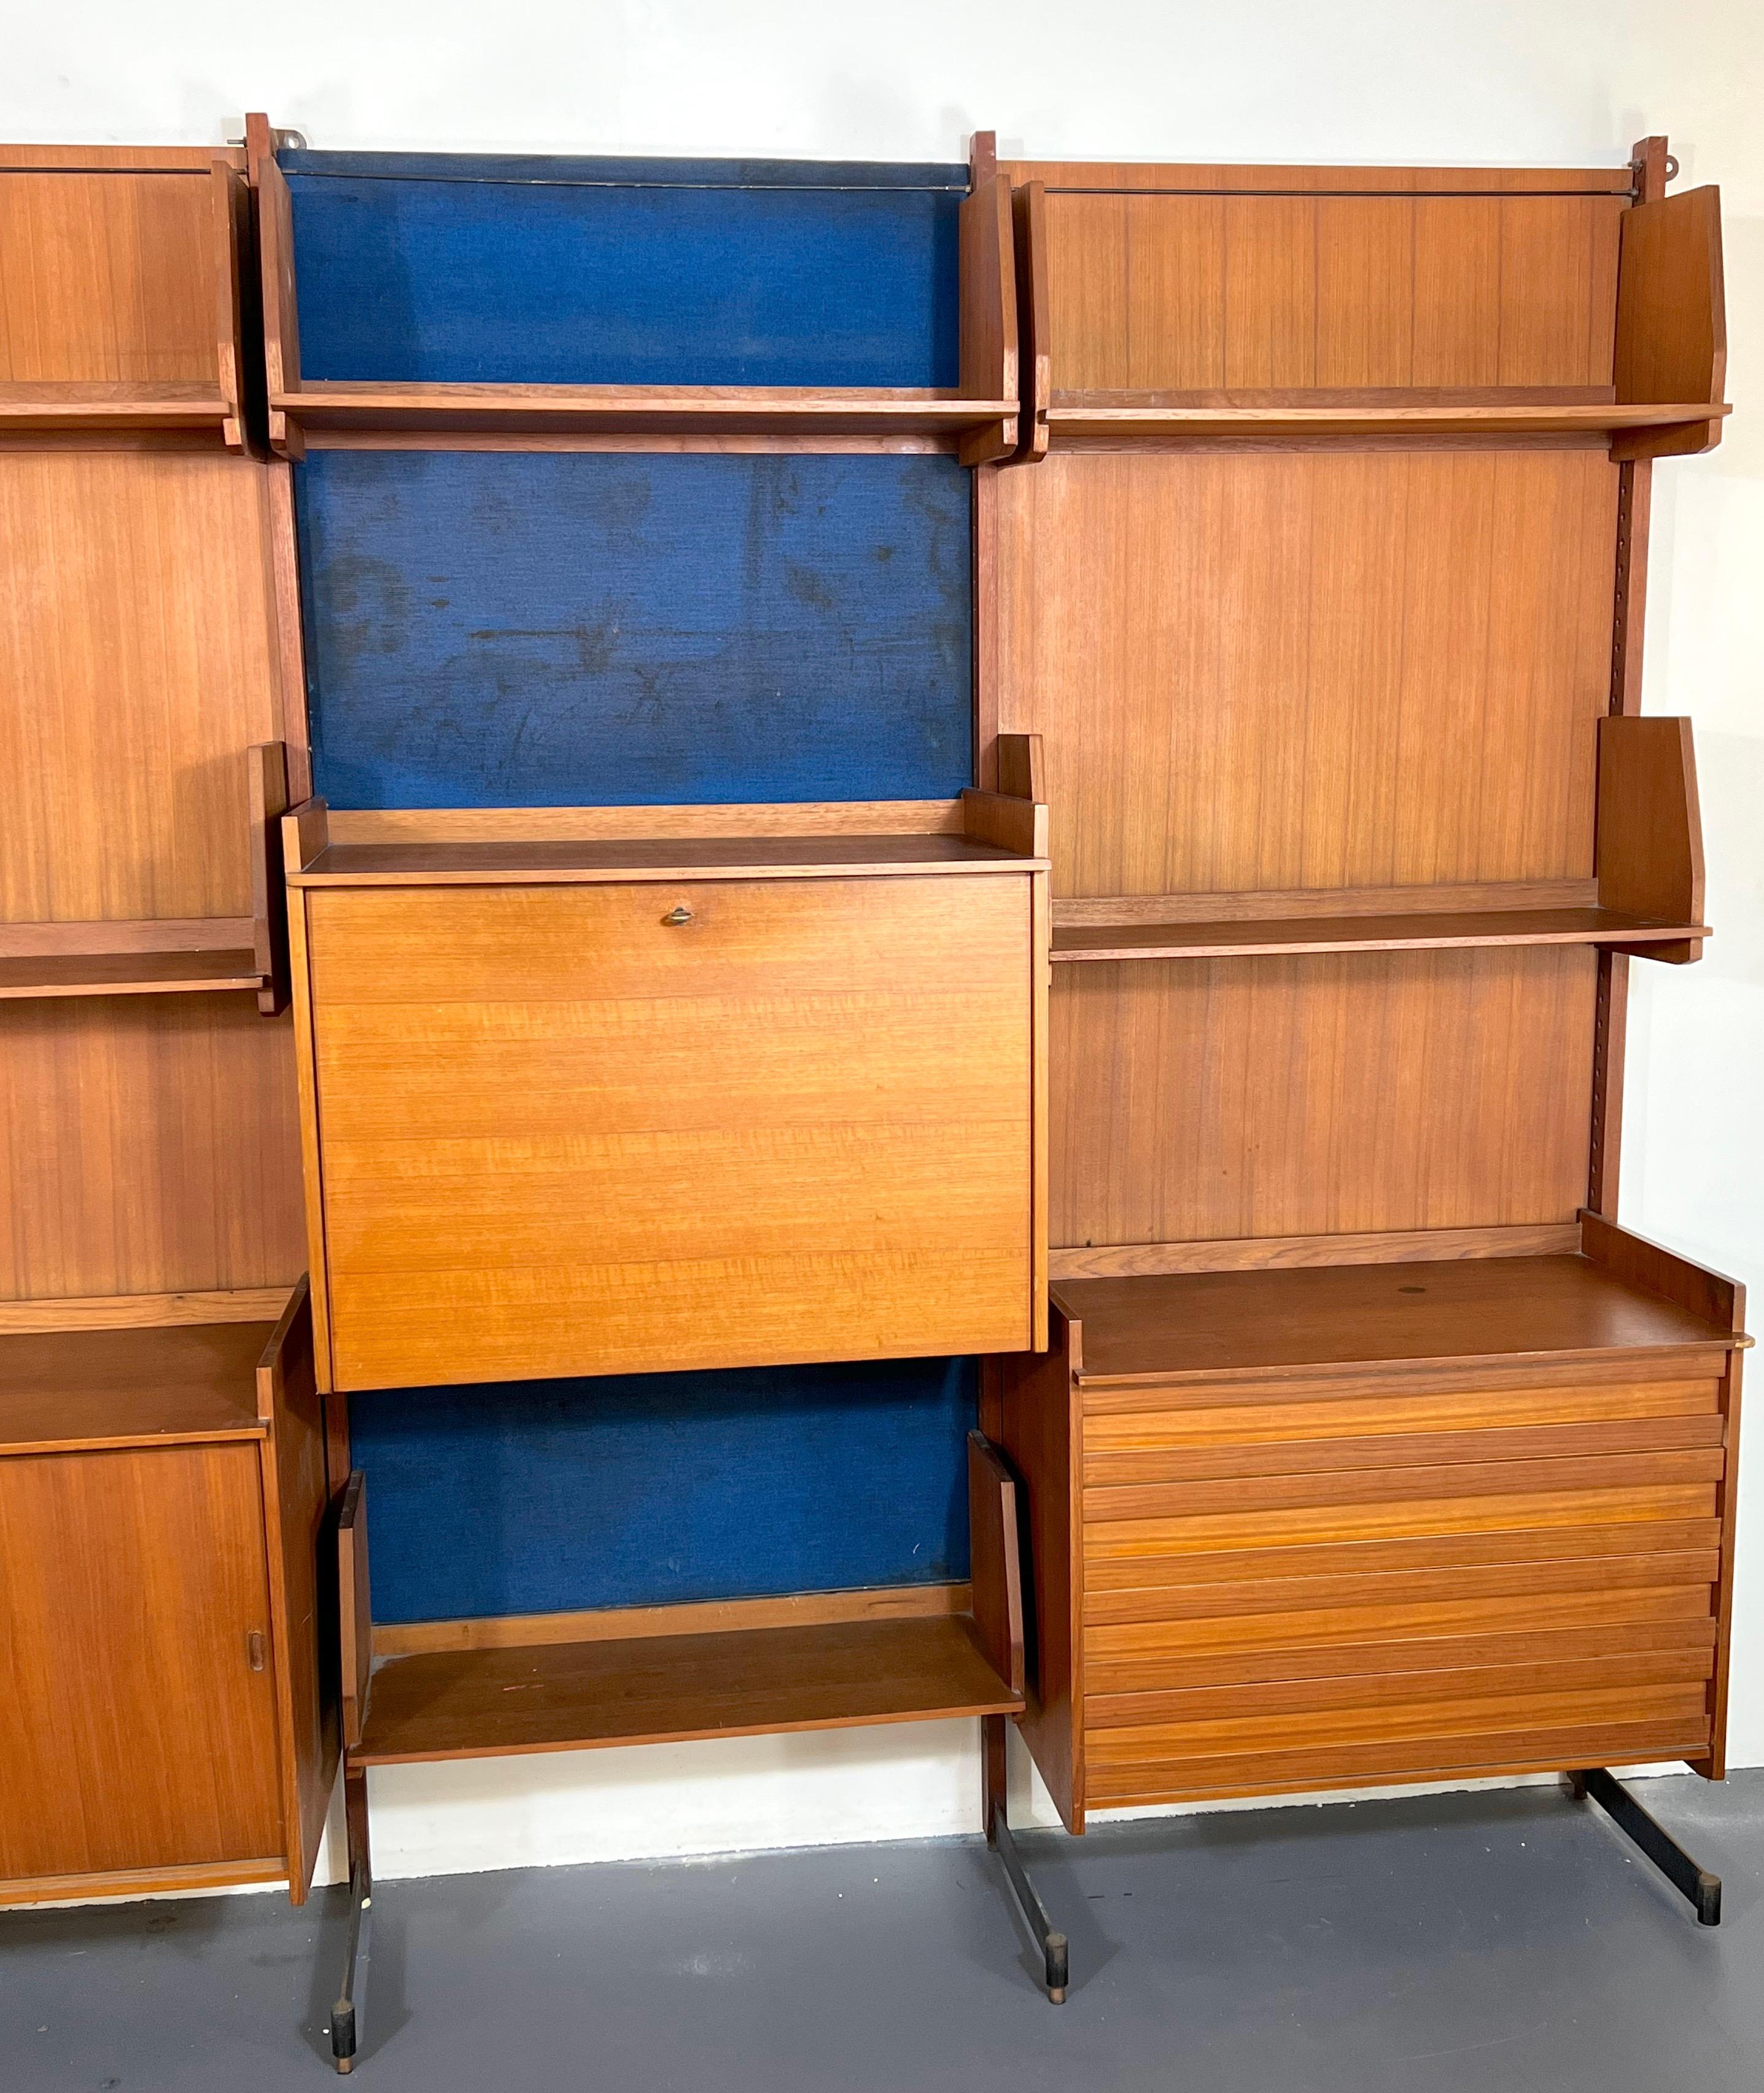 Italian Mid-Century Modern Modular Wood Bookcase from 50s For Sale